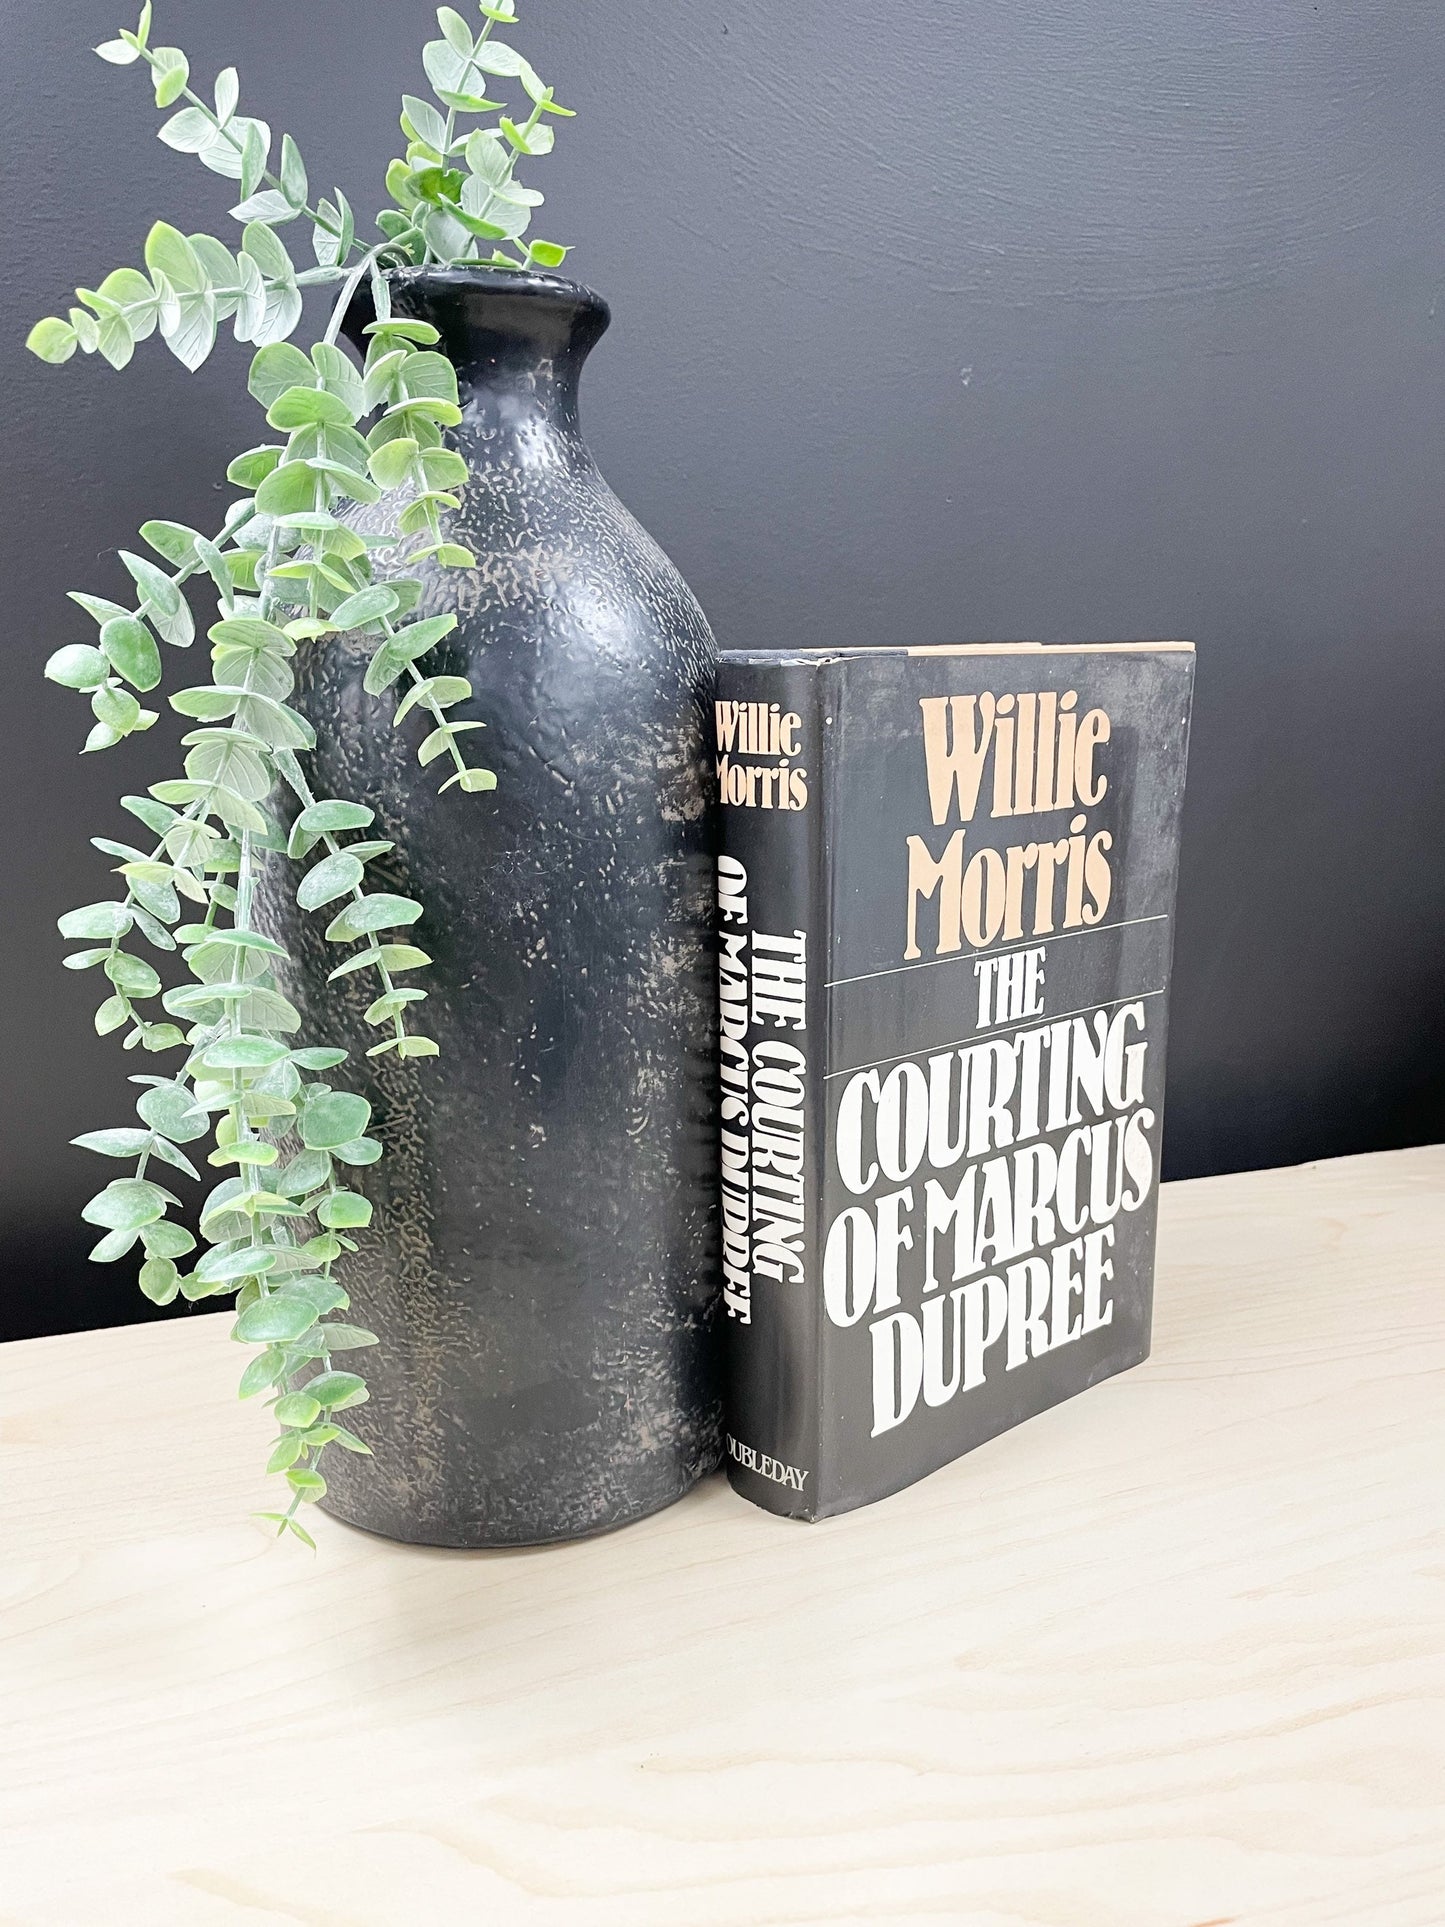 First Edition Non-Fiction Book, The Courting of Marcus Dupree by Willie Morris